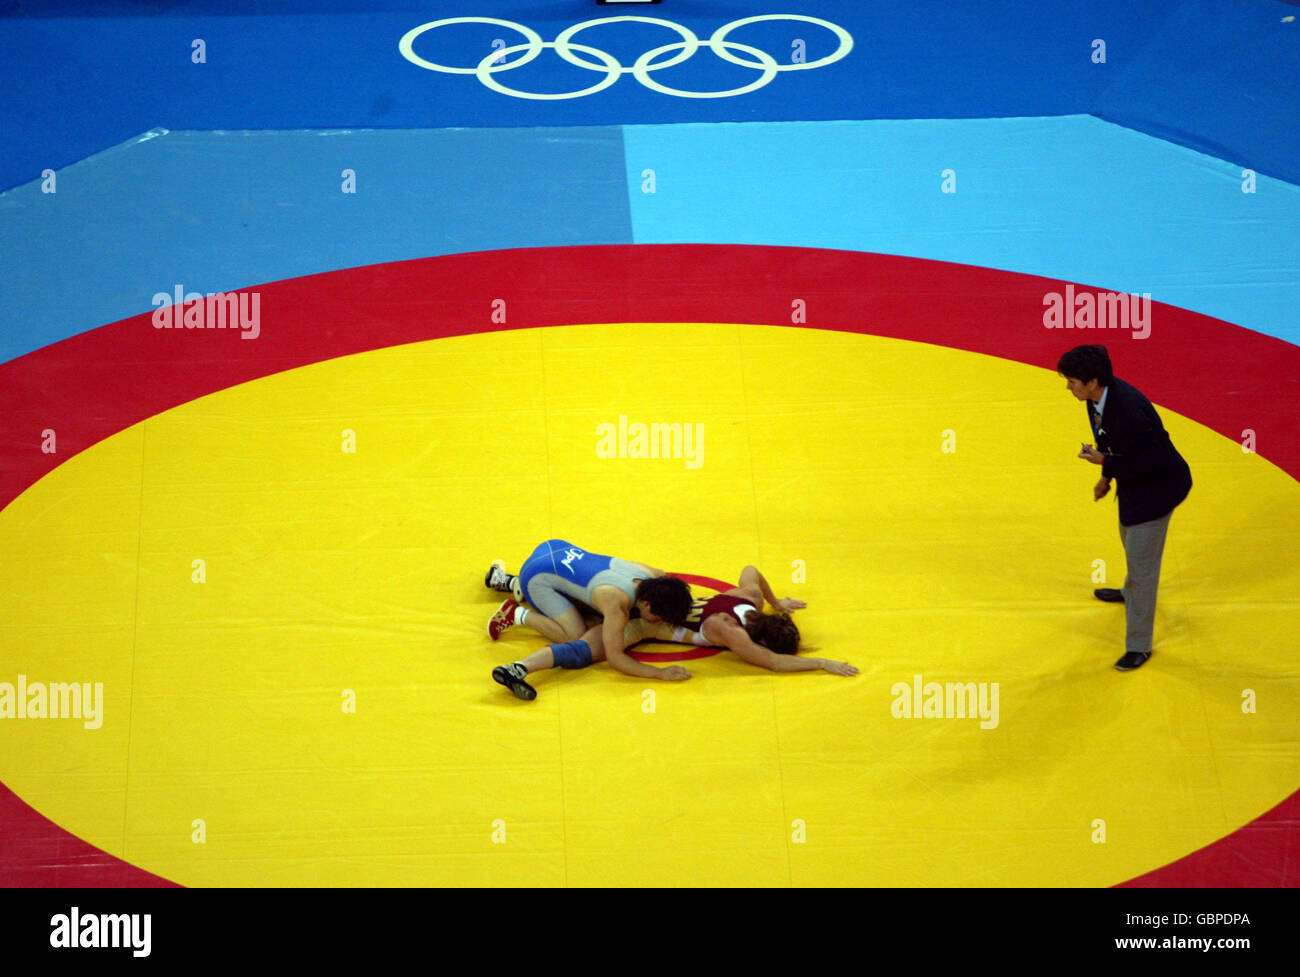 Wrestling - Athens Olympic Games 2004 - Women's 63 KG - Final. Generic view of a Women's Wrestling Match, as the referee takes a close look Stock Photo